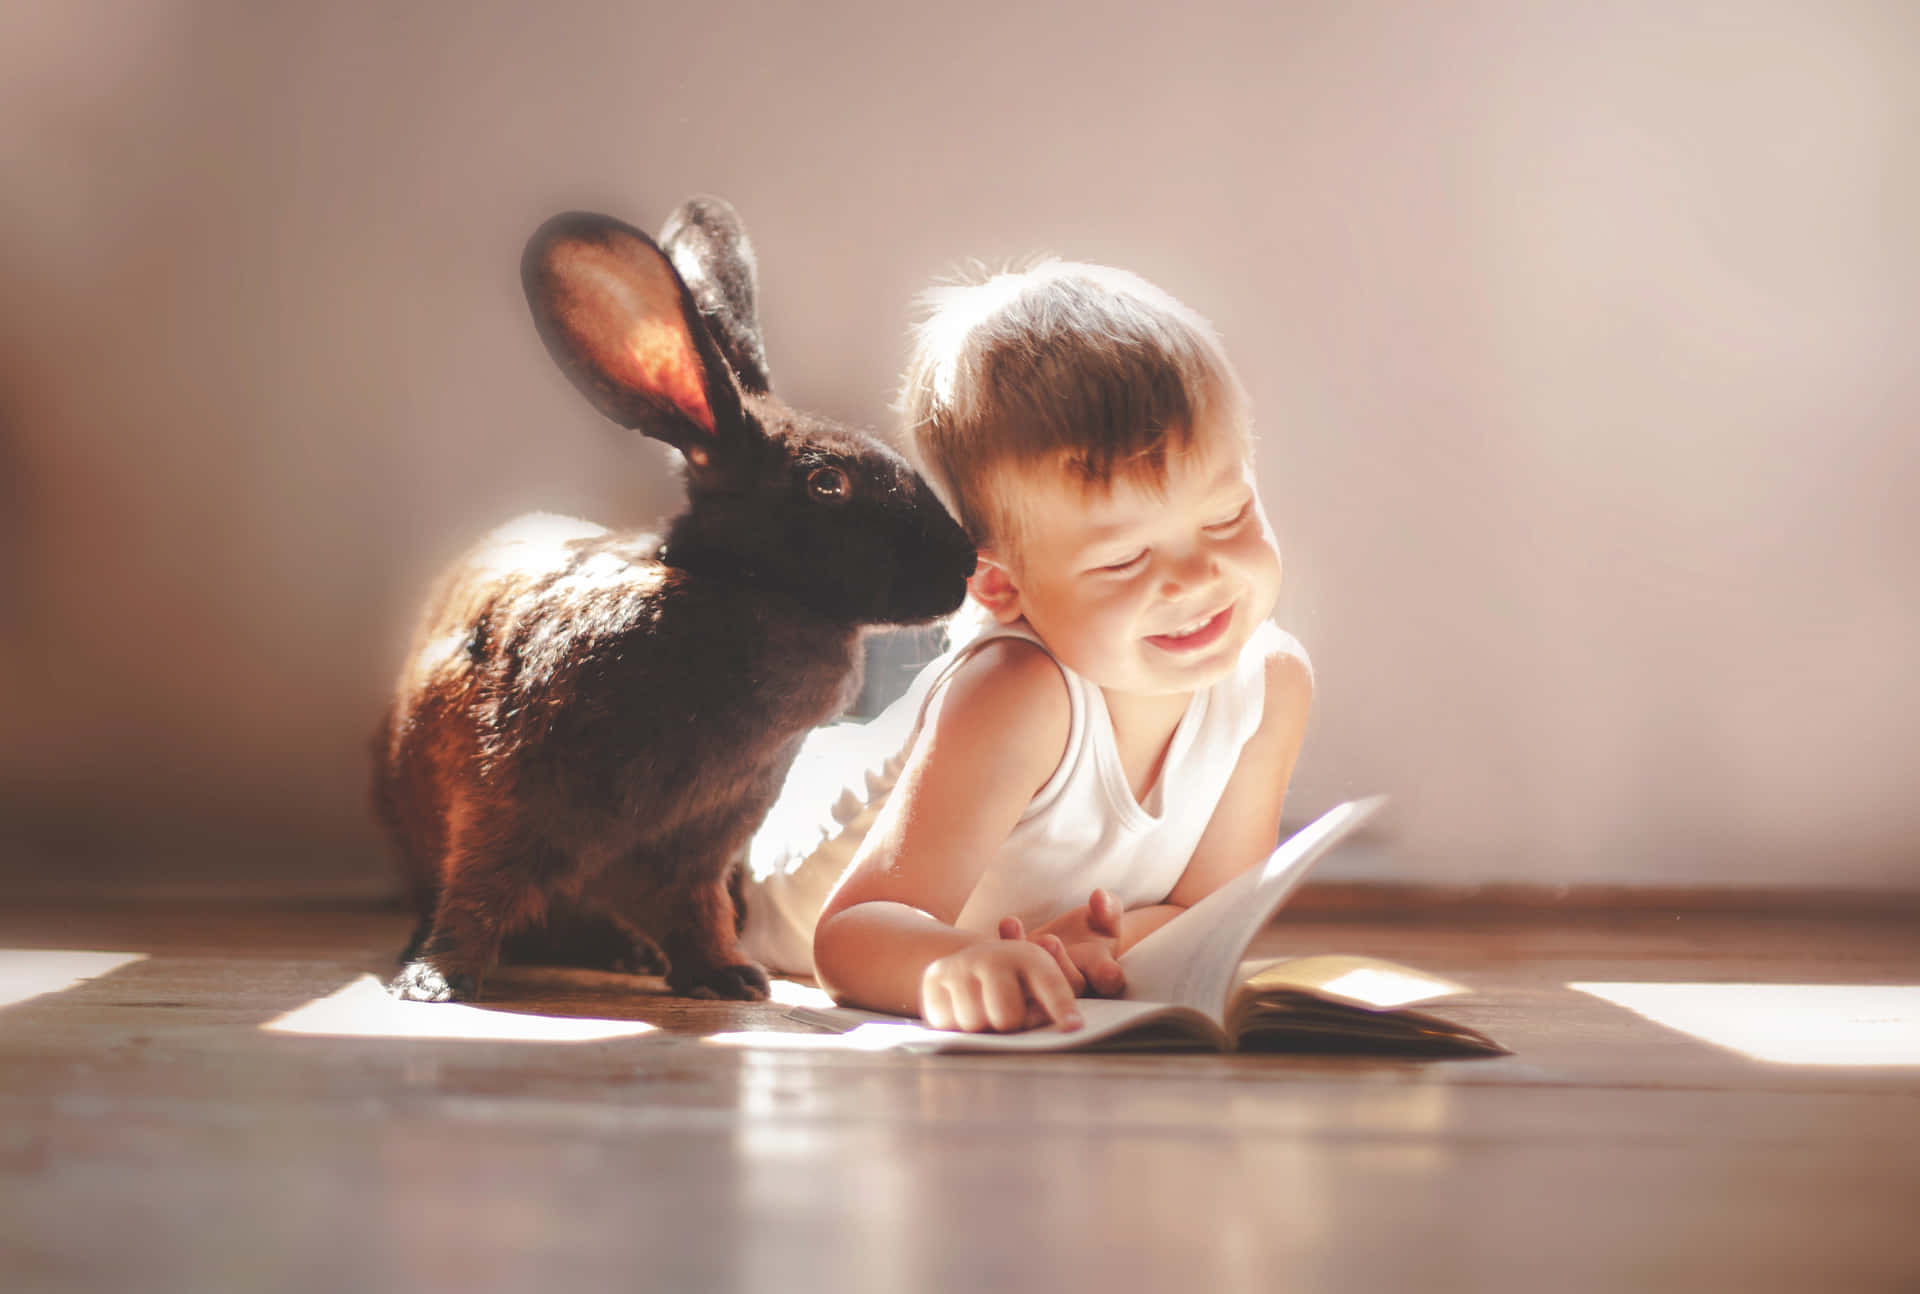 These two cuddly bunny rabbits are friends forever Wallpaper